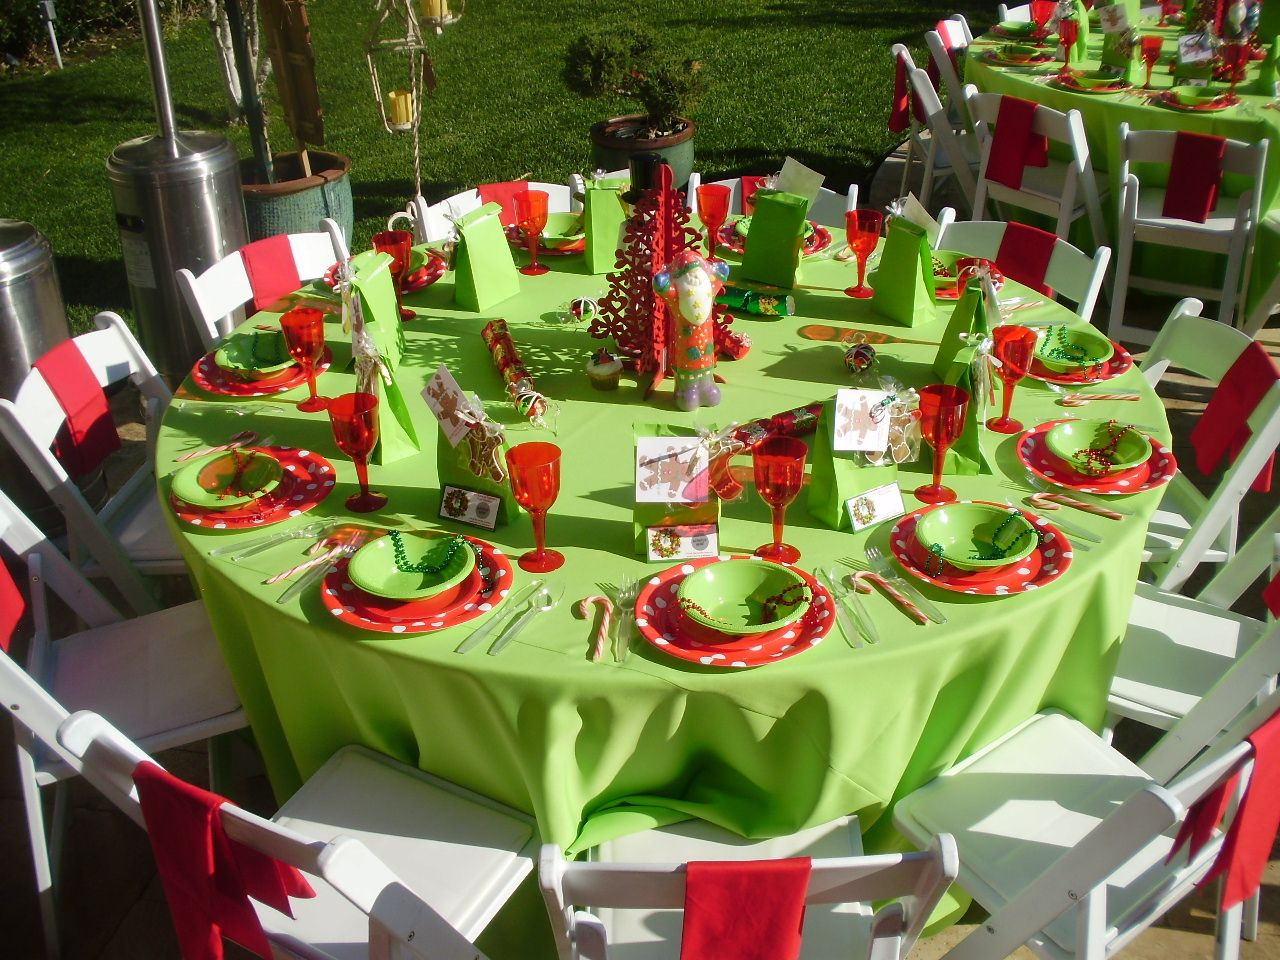 Office Christmas Party Decoration Ideas
 20 Christmas Party Decorations Ideas for This Year